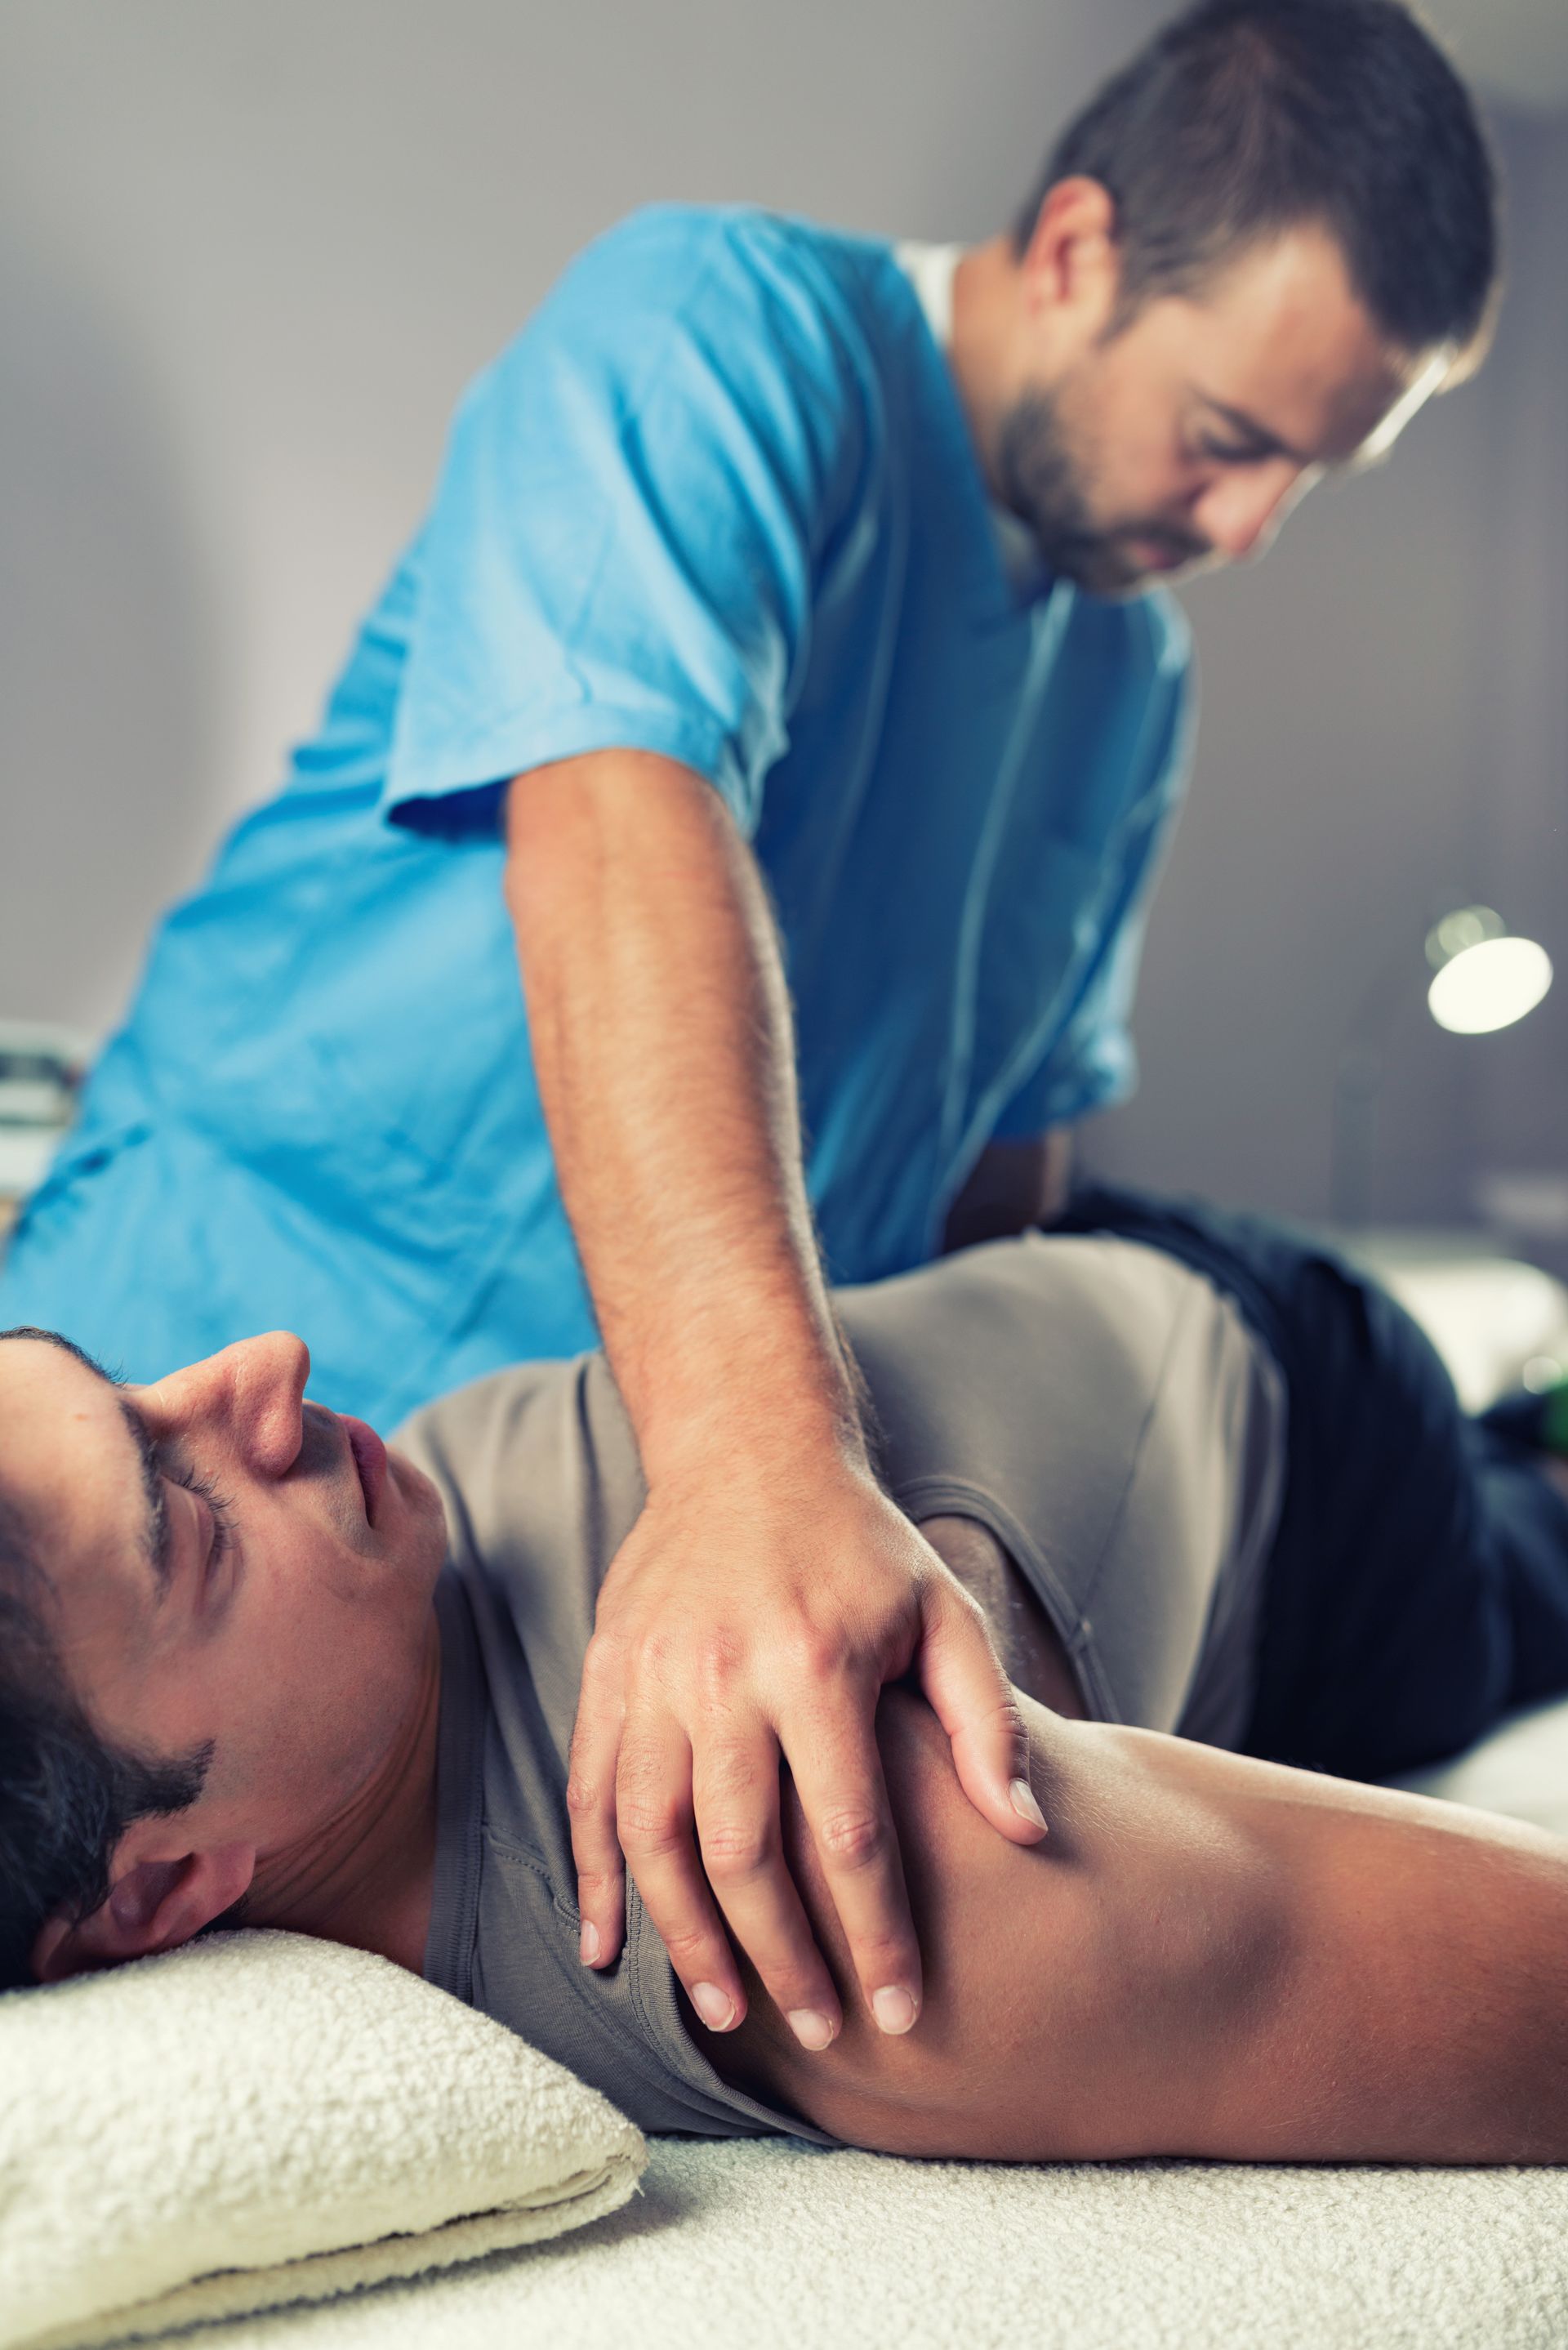 A man is laying on a bed getting a massage from a doctor.